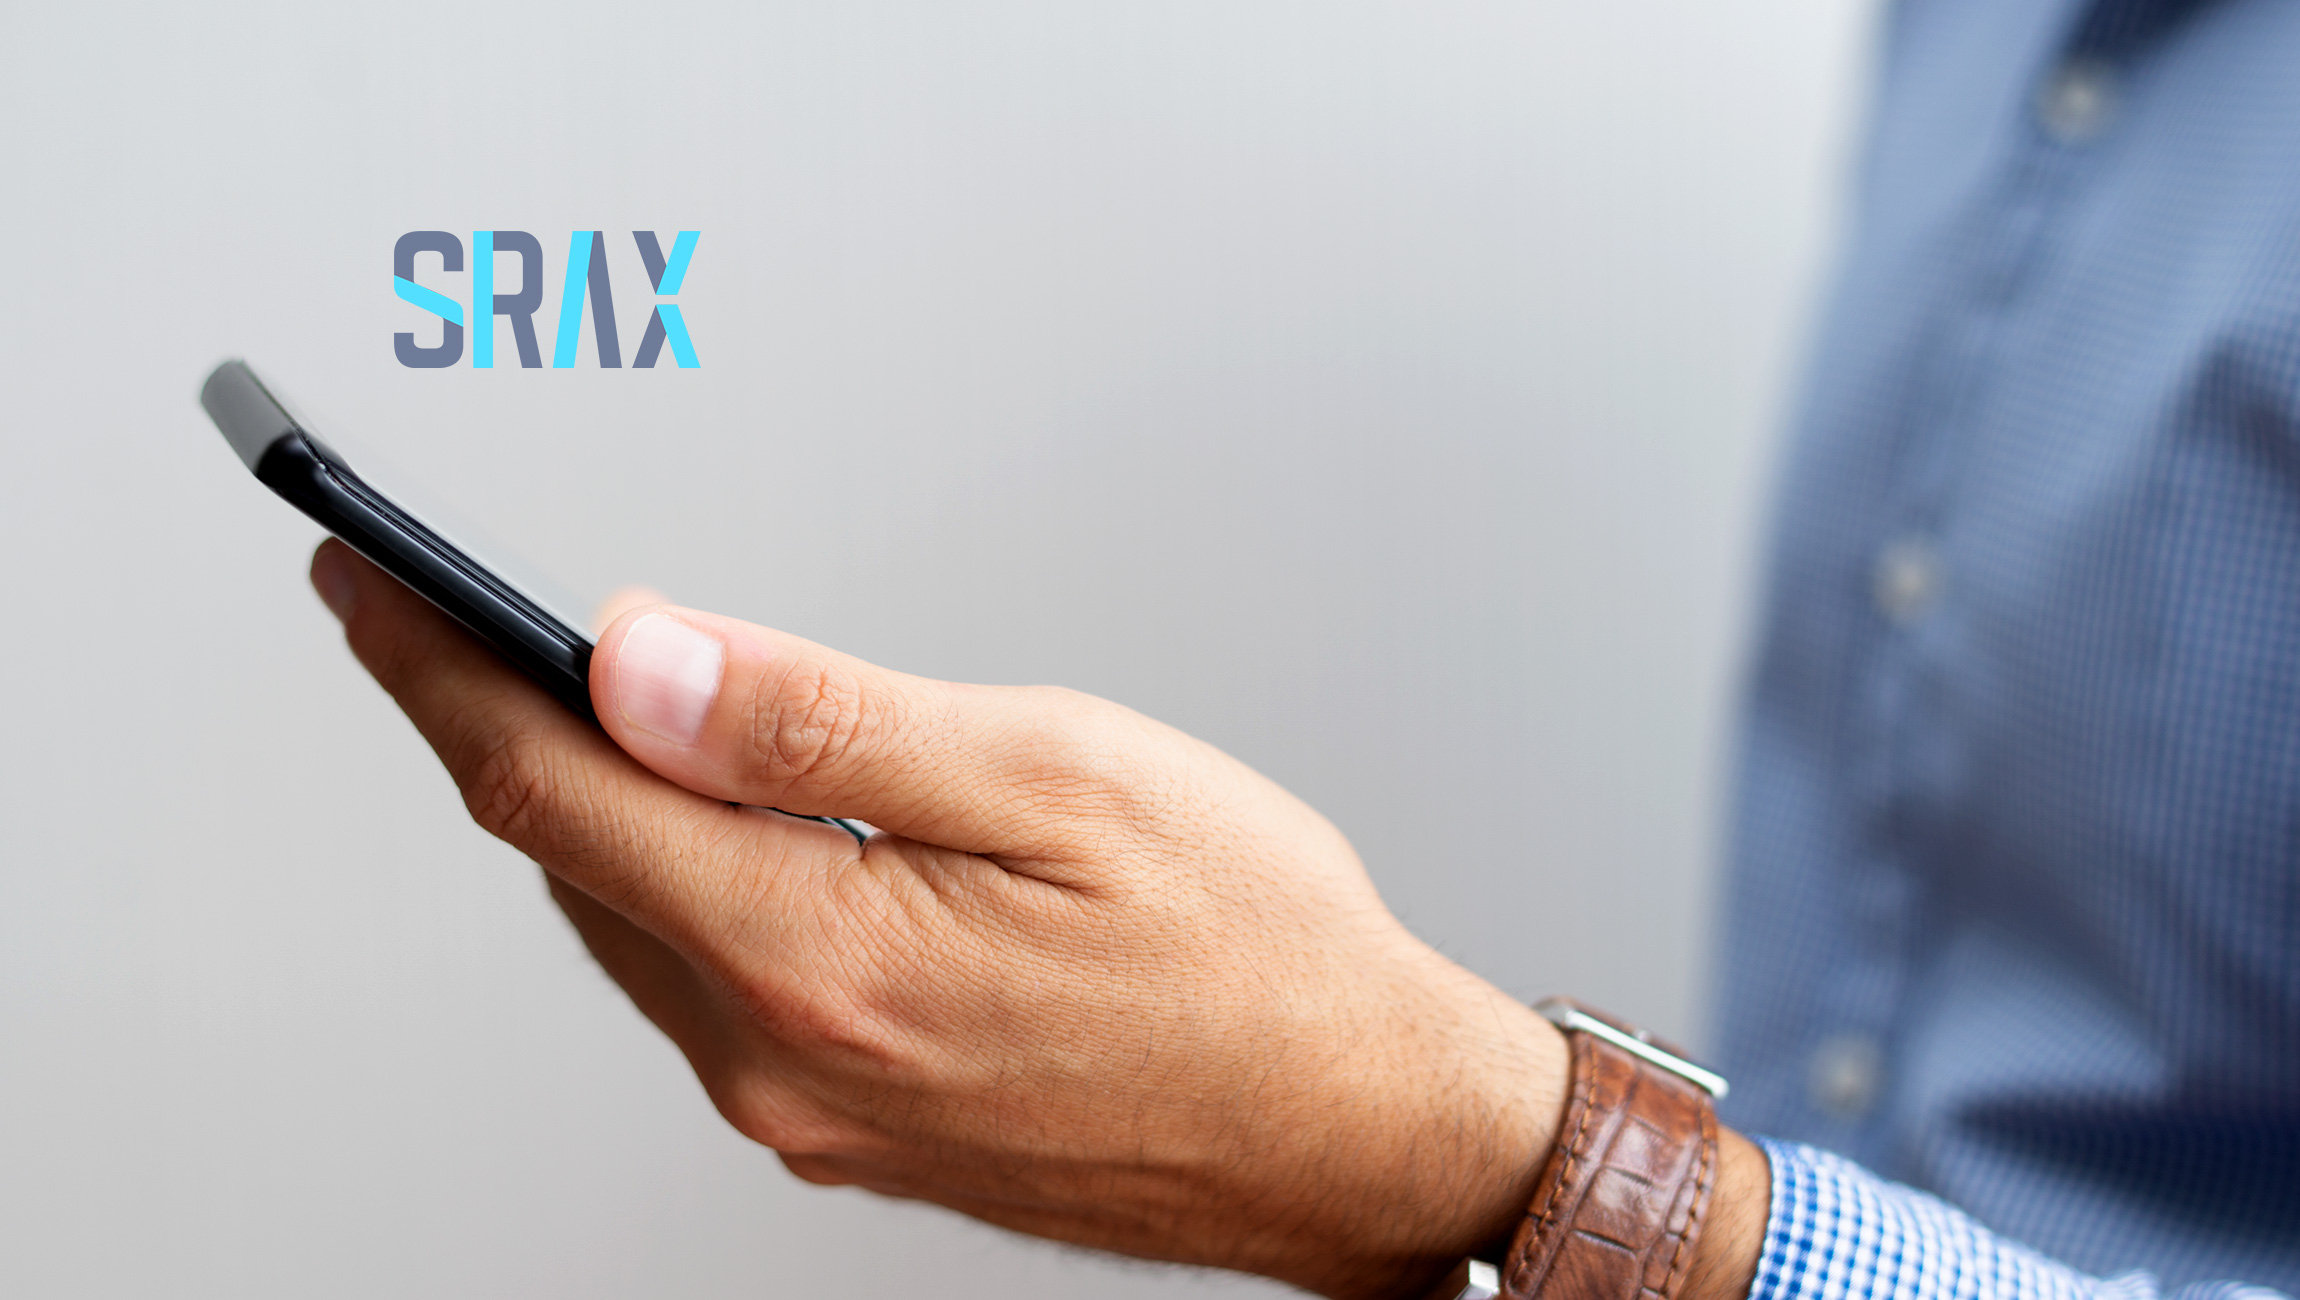 SRAX Joins Big Tech Leaders and Interactive Advertising Bureau for Consumer Data Privacy and Compensation in 2019